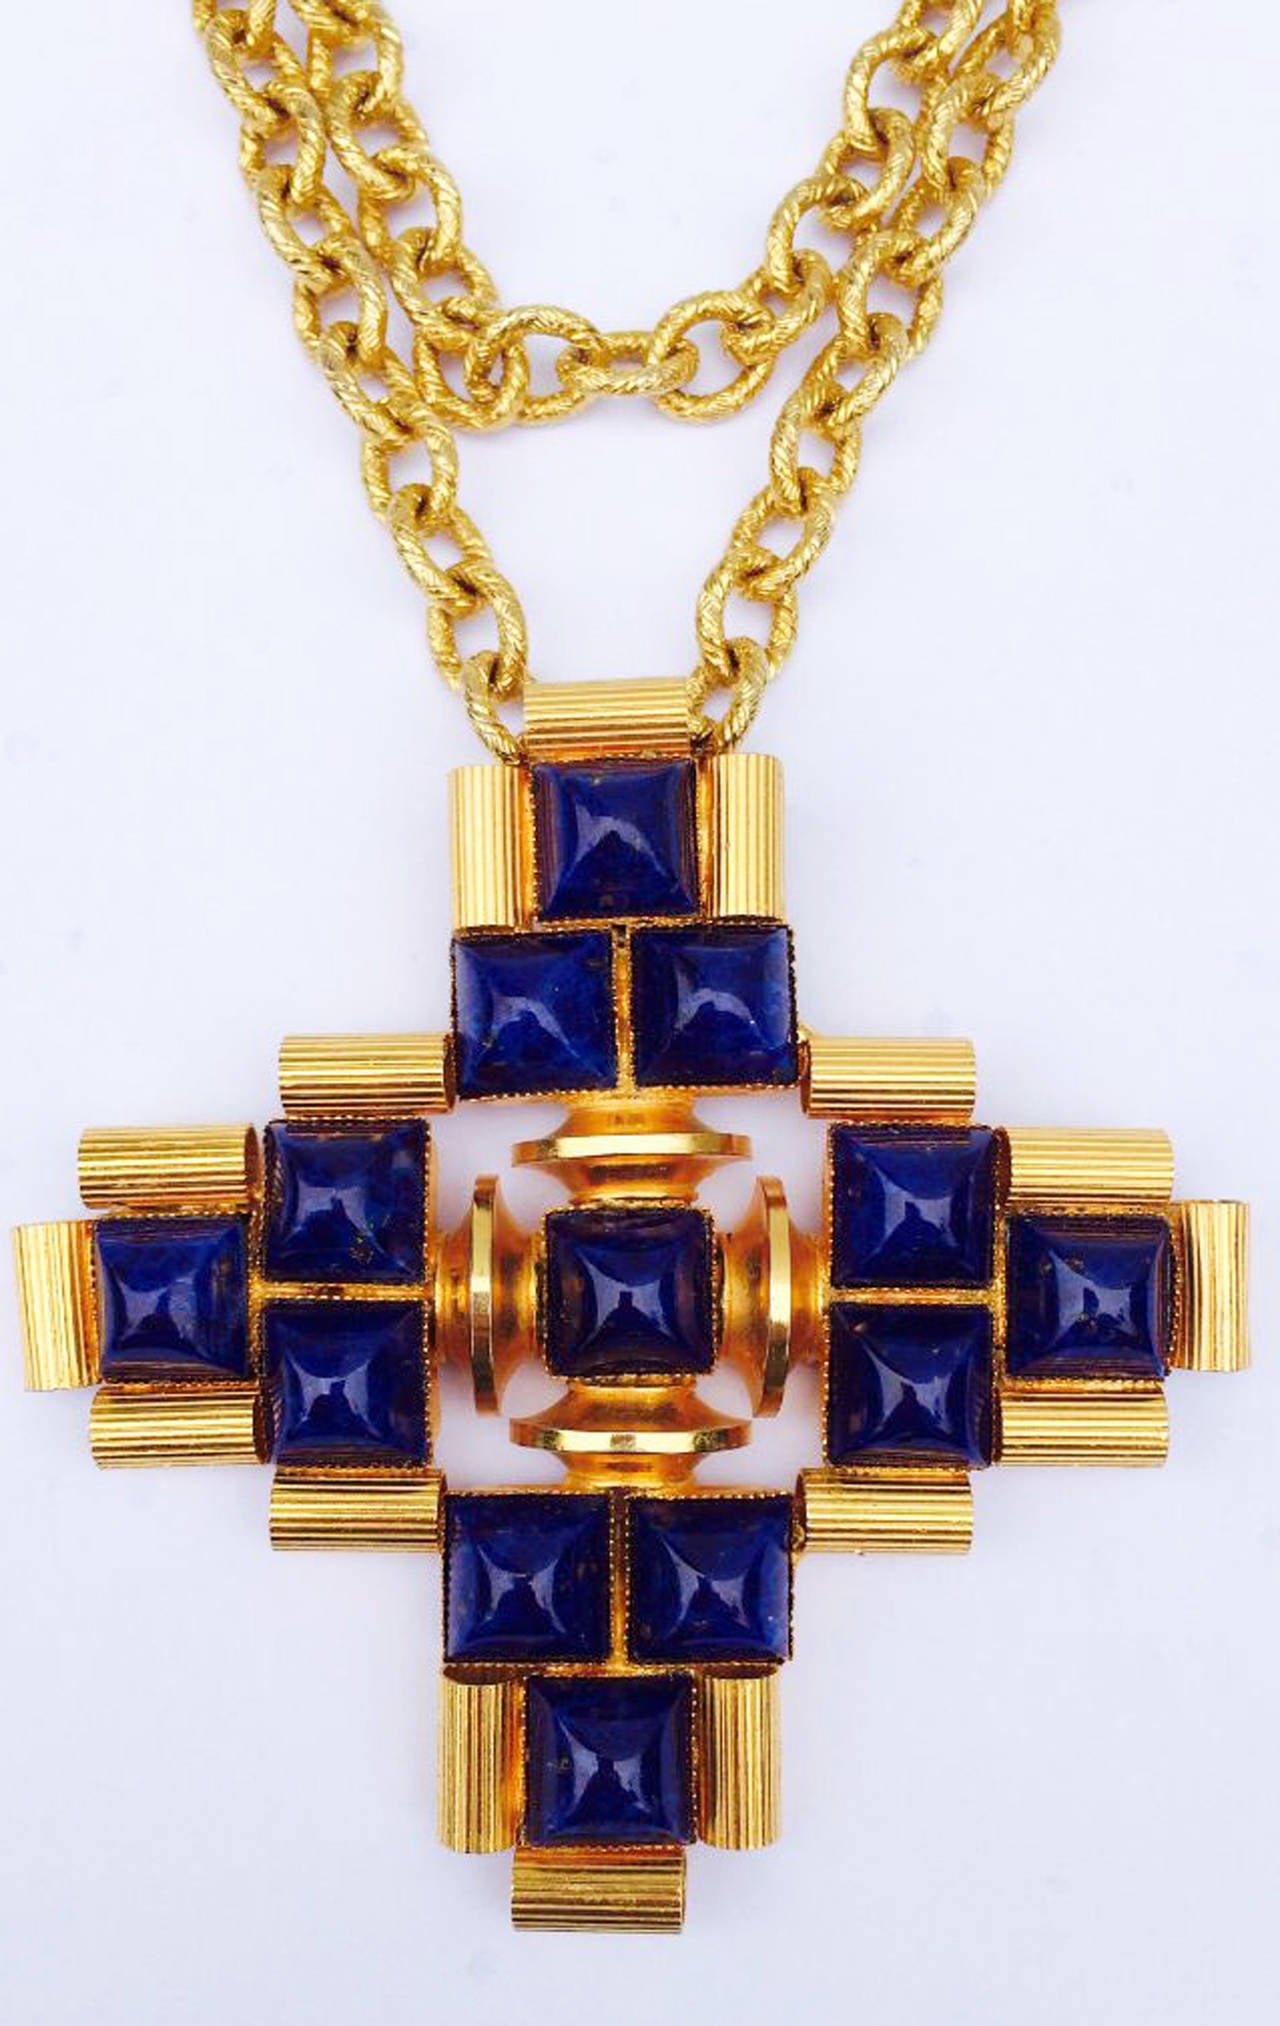 A fine and rare vintage William de Lillo pendant necklace. Signed gilt metal item features a detachable brooch and a 28